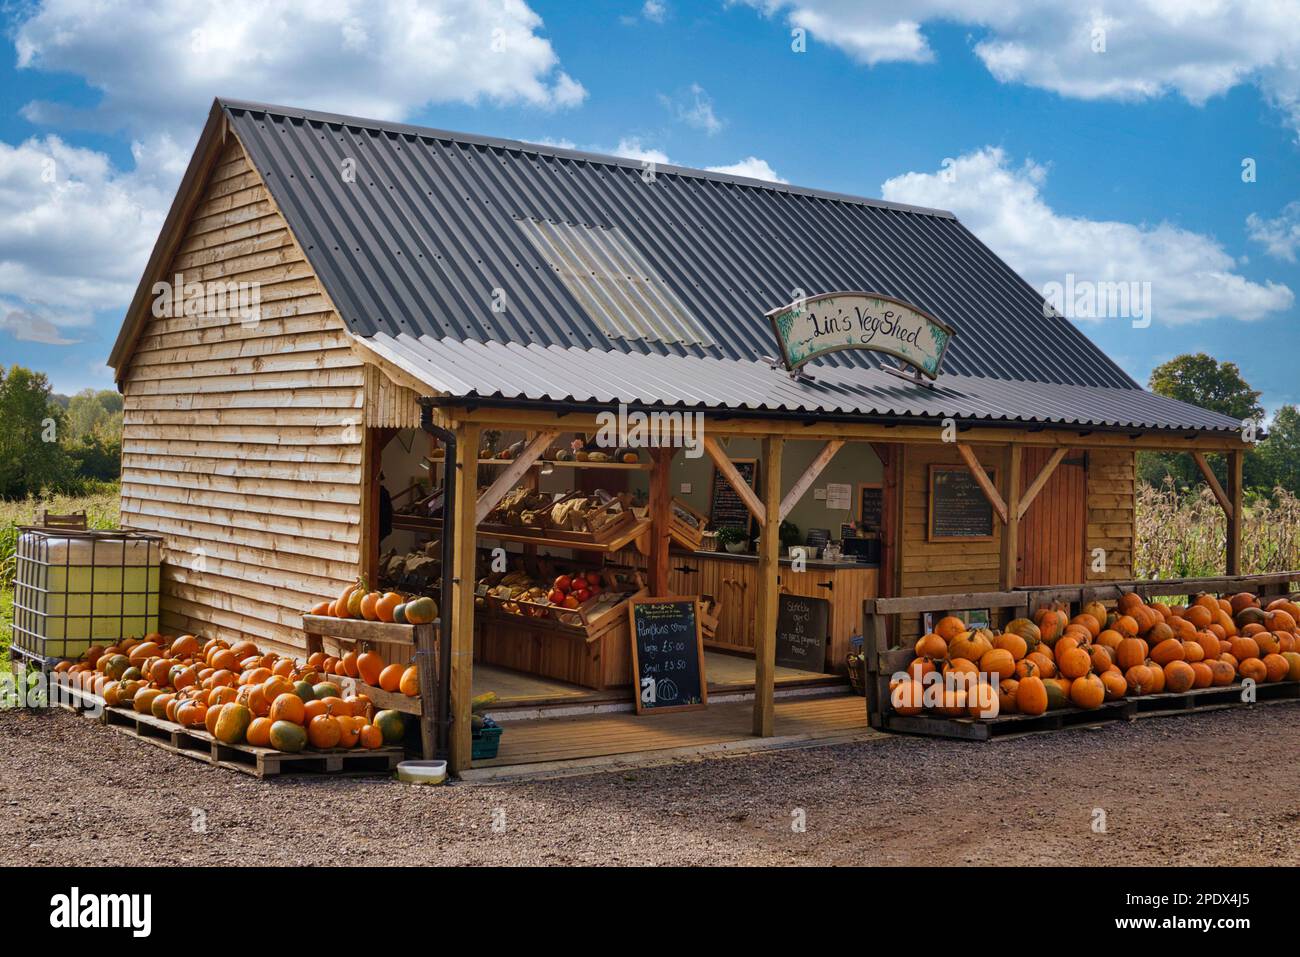 Farmshop At Whitchurch On Thames, Oxfordshire, UK Stock Photo